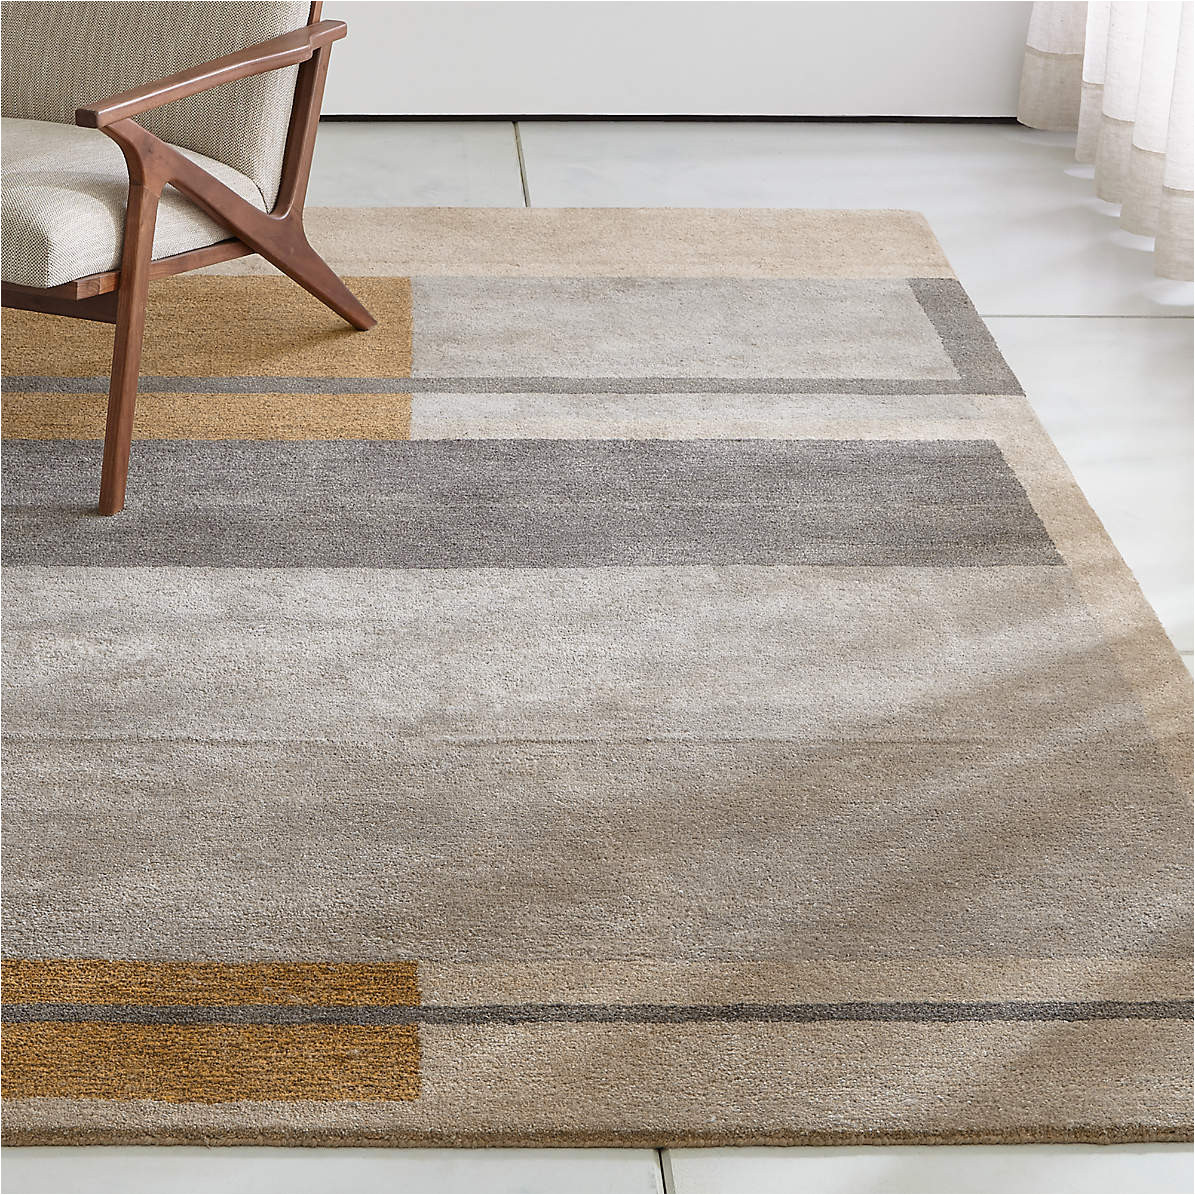 Crate and Barrel Round area Rugs Kirk Color Block area Rug Crate & Barrel